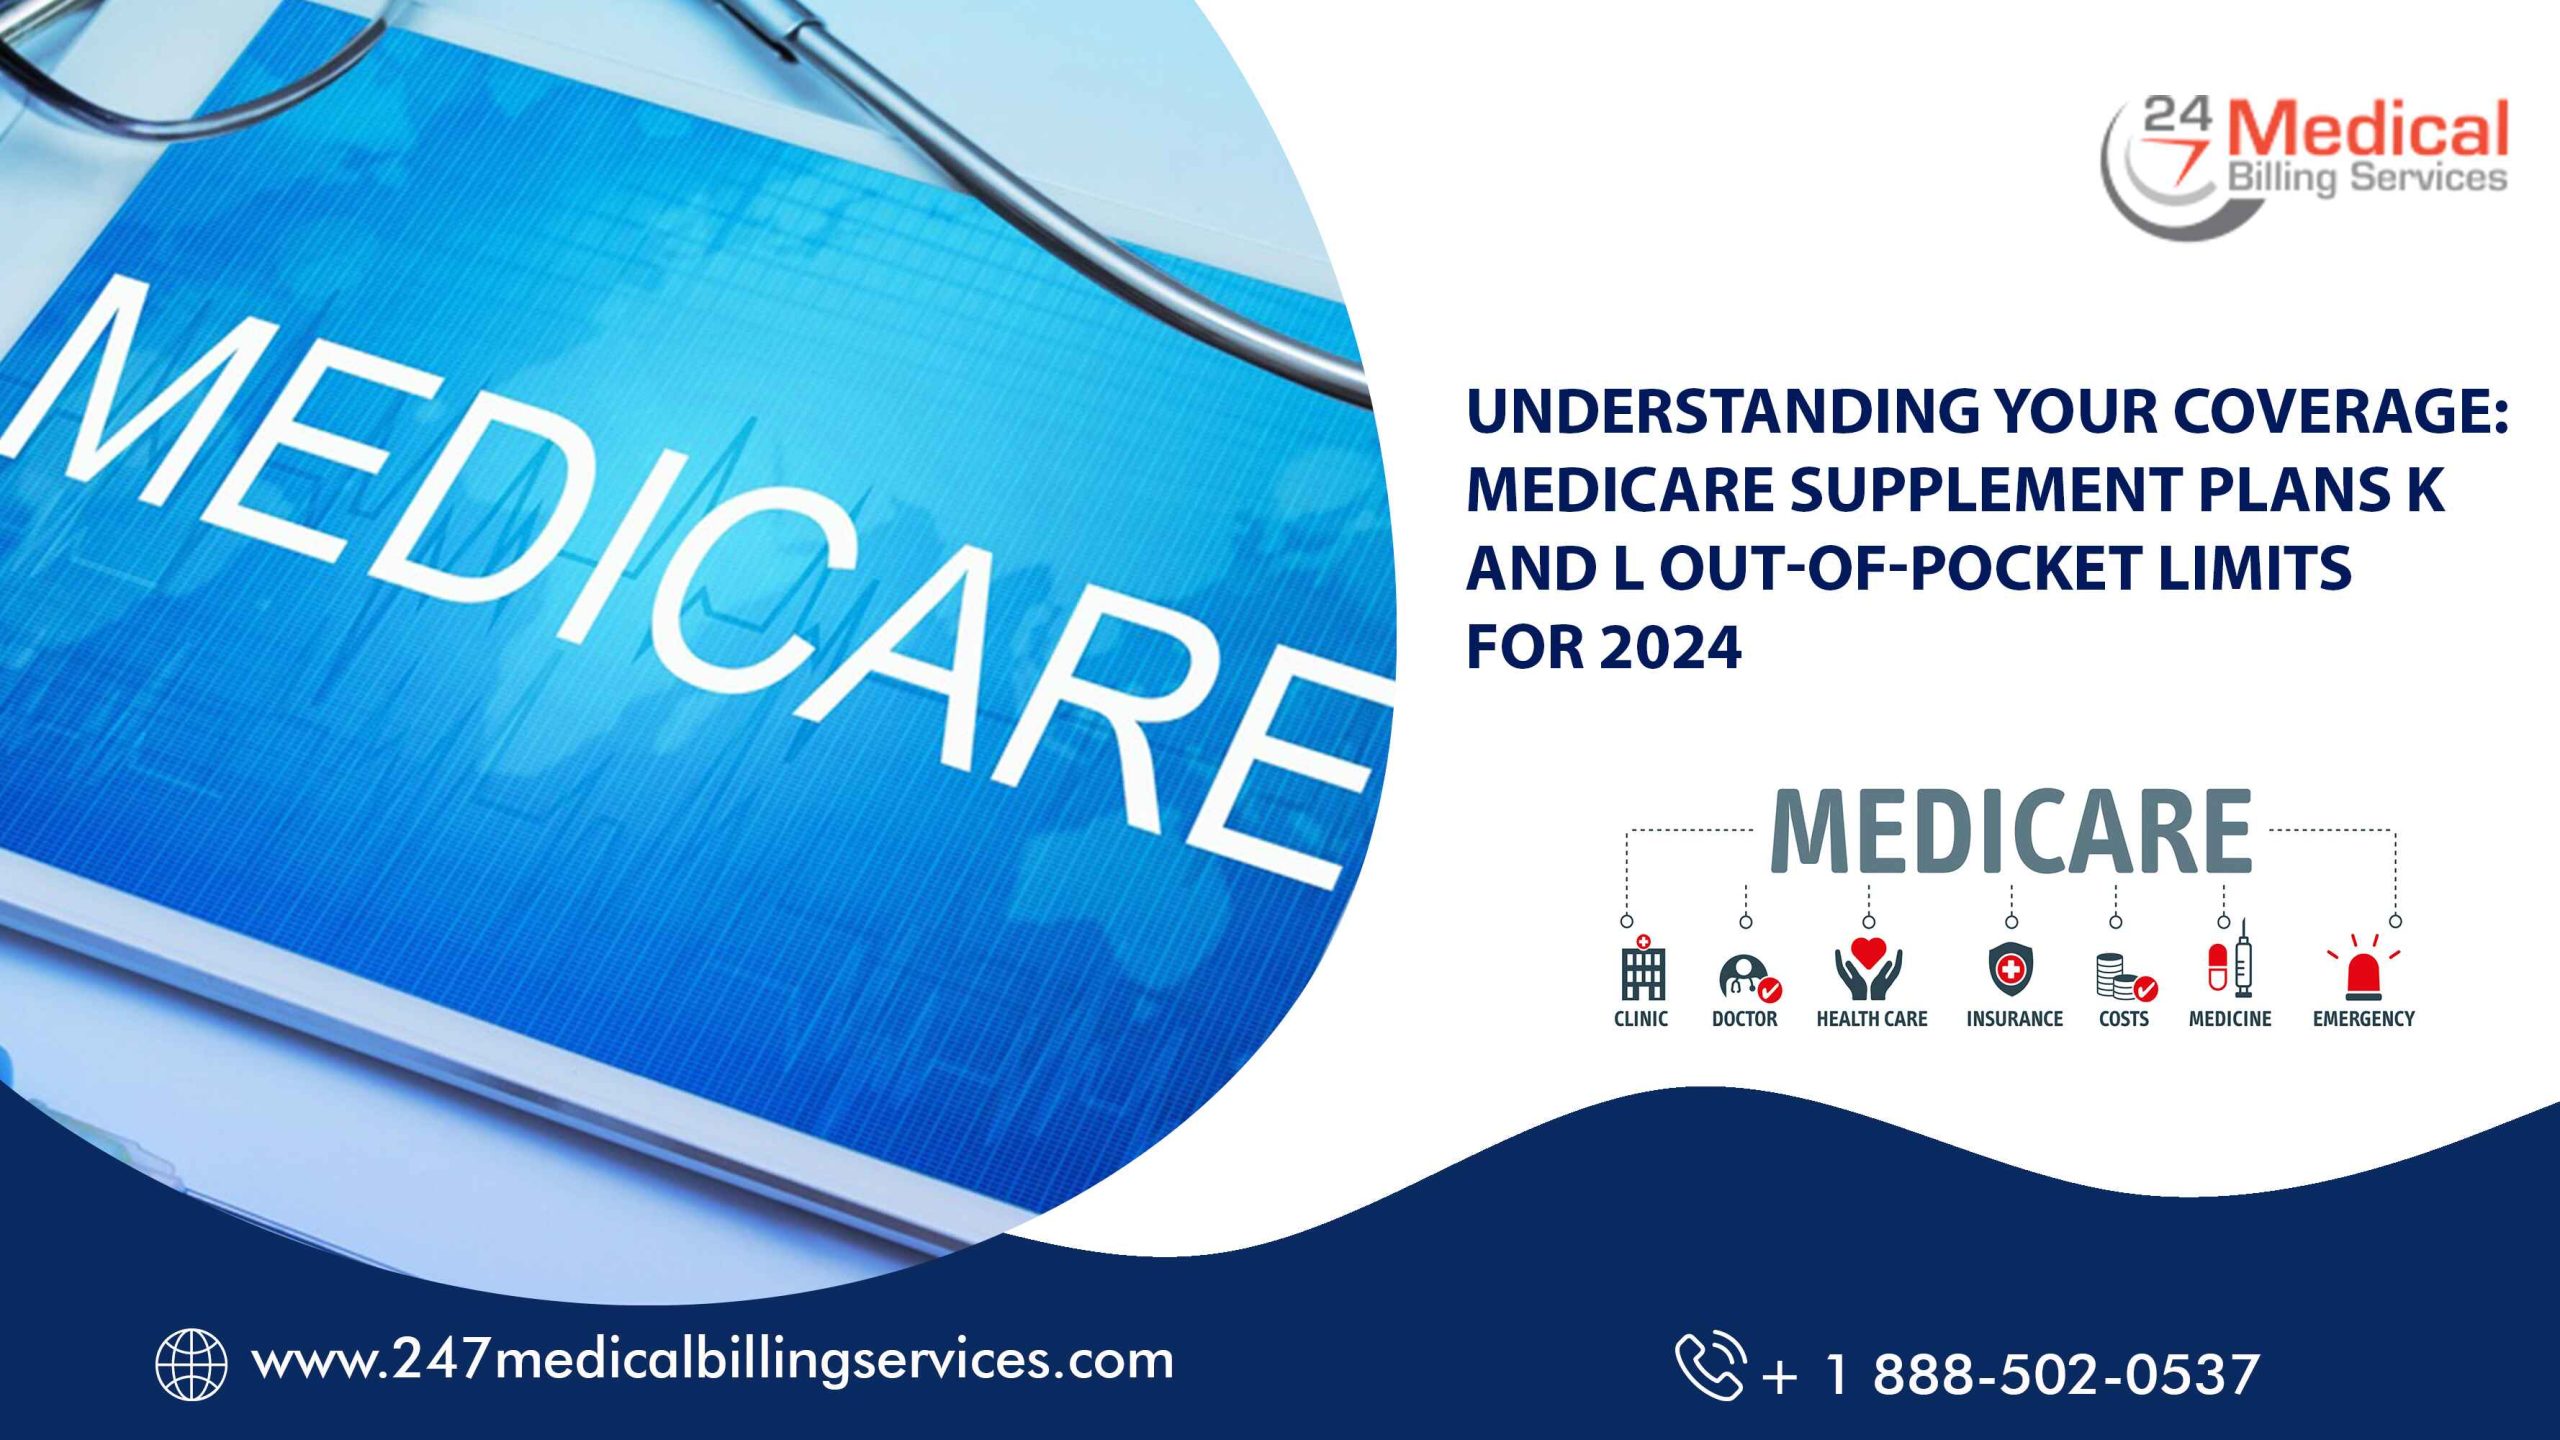  Understanding Your Coverage: Medicare Supplement Plans K and L Out-of-Pocket Limits for 2024